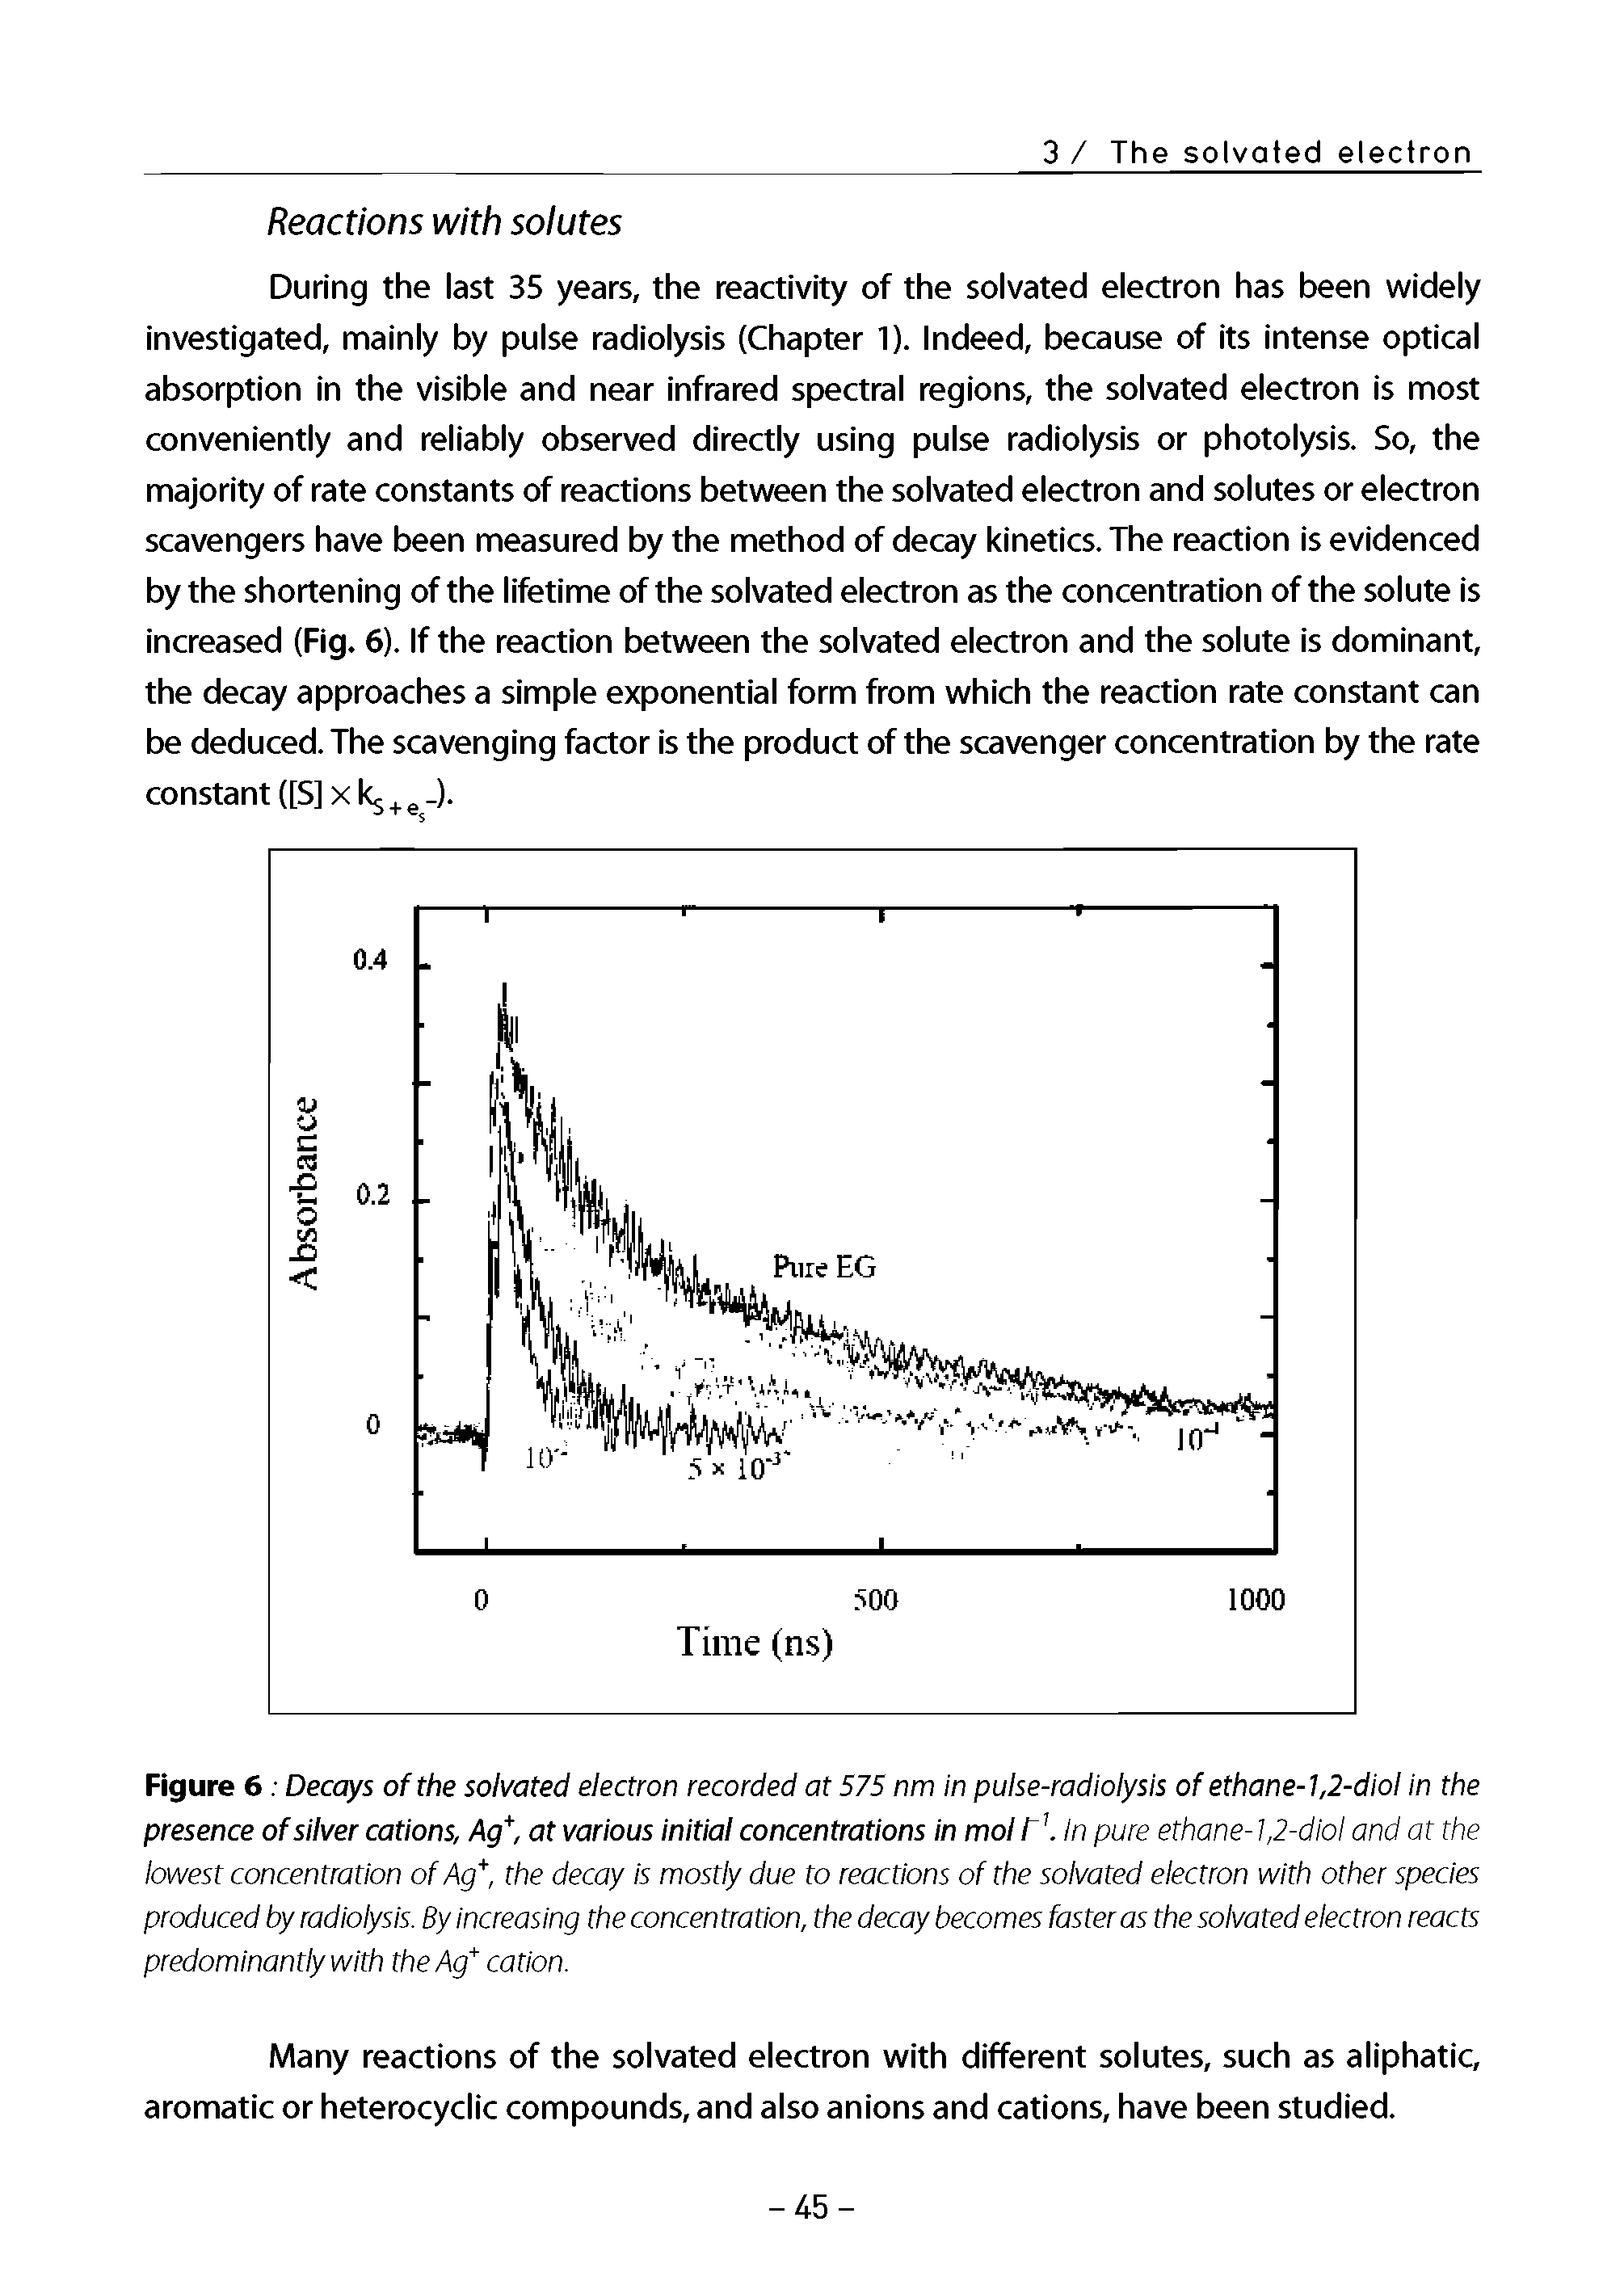 Figure 6 Decays ofthe solvated electron recorded at 575 nm in pulse-radiolysis of ethane-1,2-diol in the presence of silver cations, Ag, at various initial concentrations in mol f. In pure ethane-1,2-diol and at the lowest concentration of Ag, the decay is mostly due to reactions of the solvated electron with other species produced by radiolysis. By increasing the concentration, the decay becomes faster as the solvated electron reacts predominantly with theAg cation.